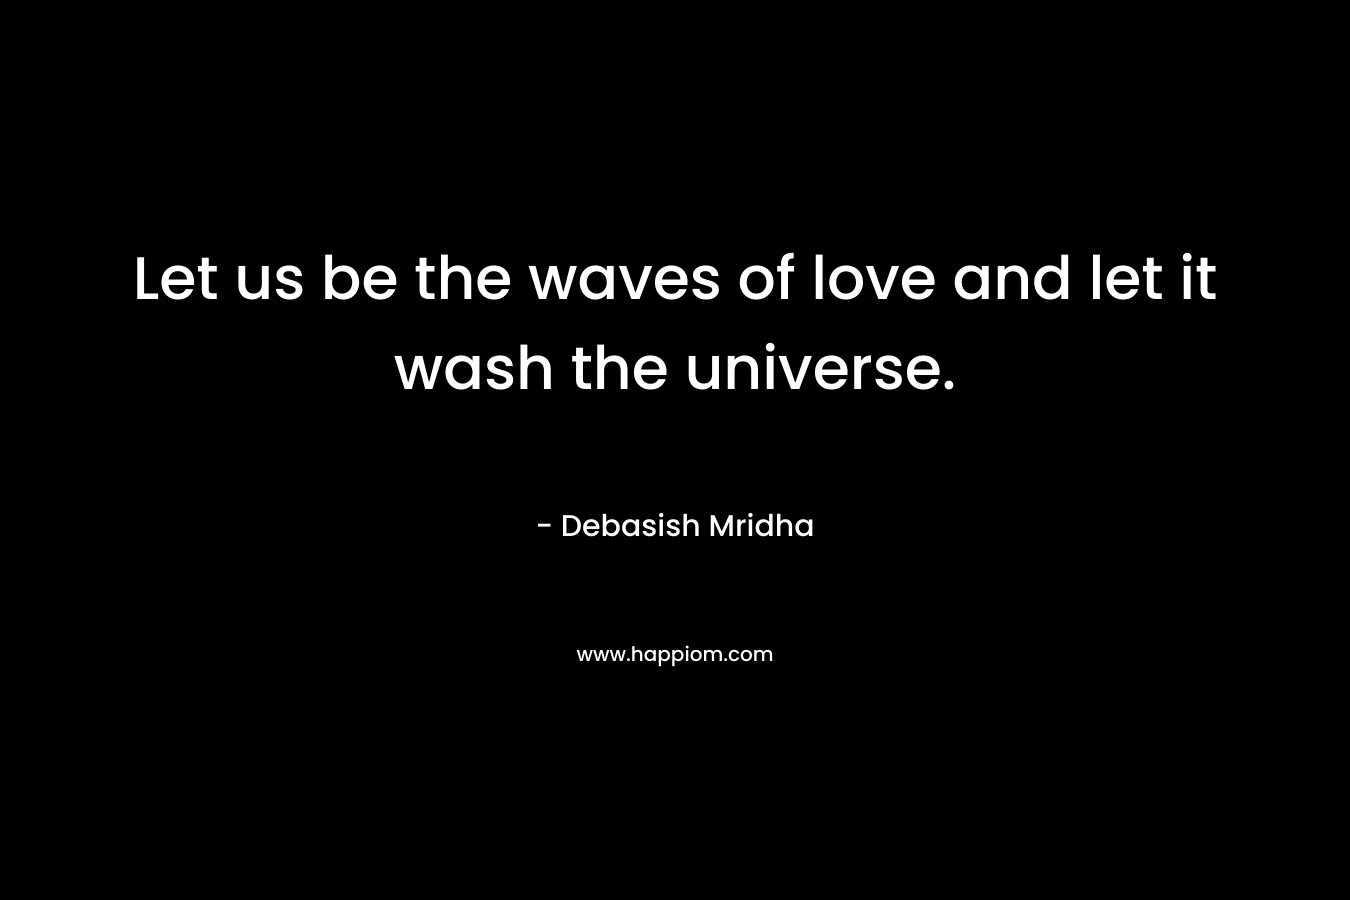 Let us be the waves of love and let it wash the universe.